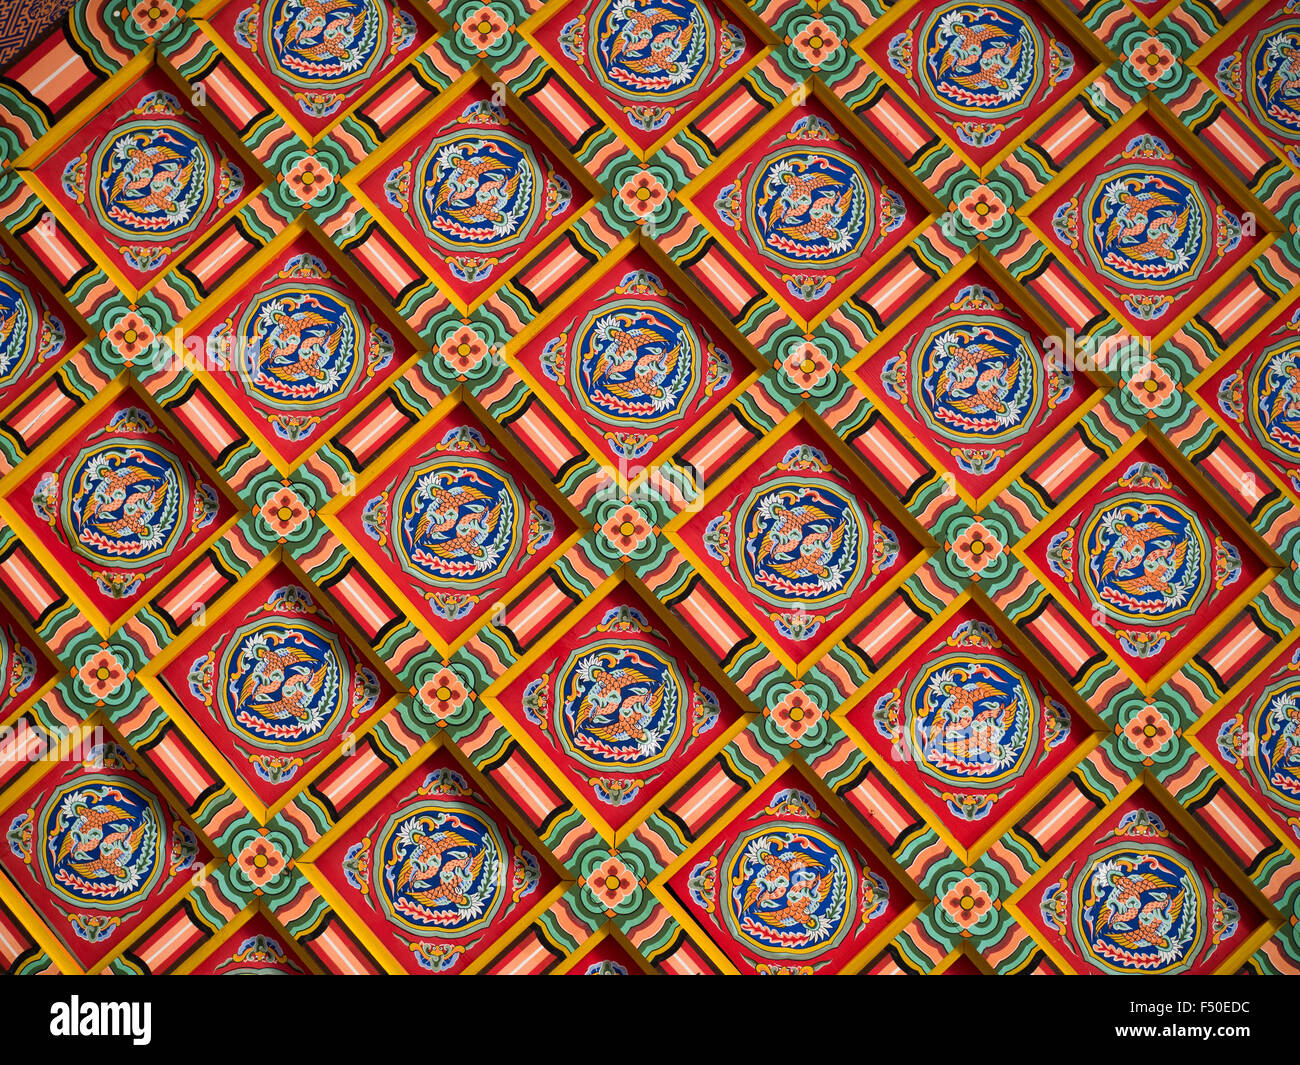 Ornate pattern on the roof of the king's chambers in the Gyeongbokgung Palace (경복궁) in Seoul, South Korea Stock Photo